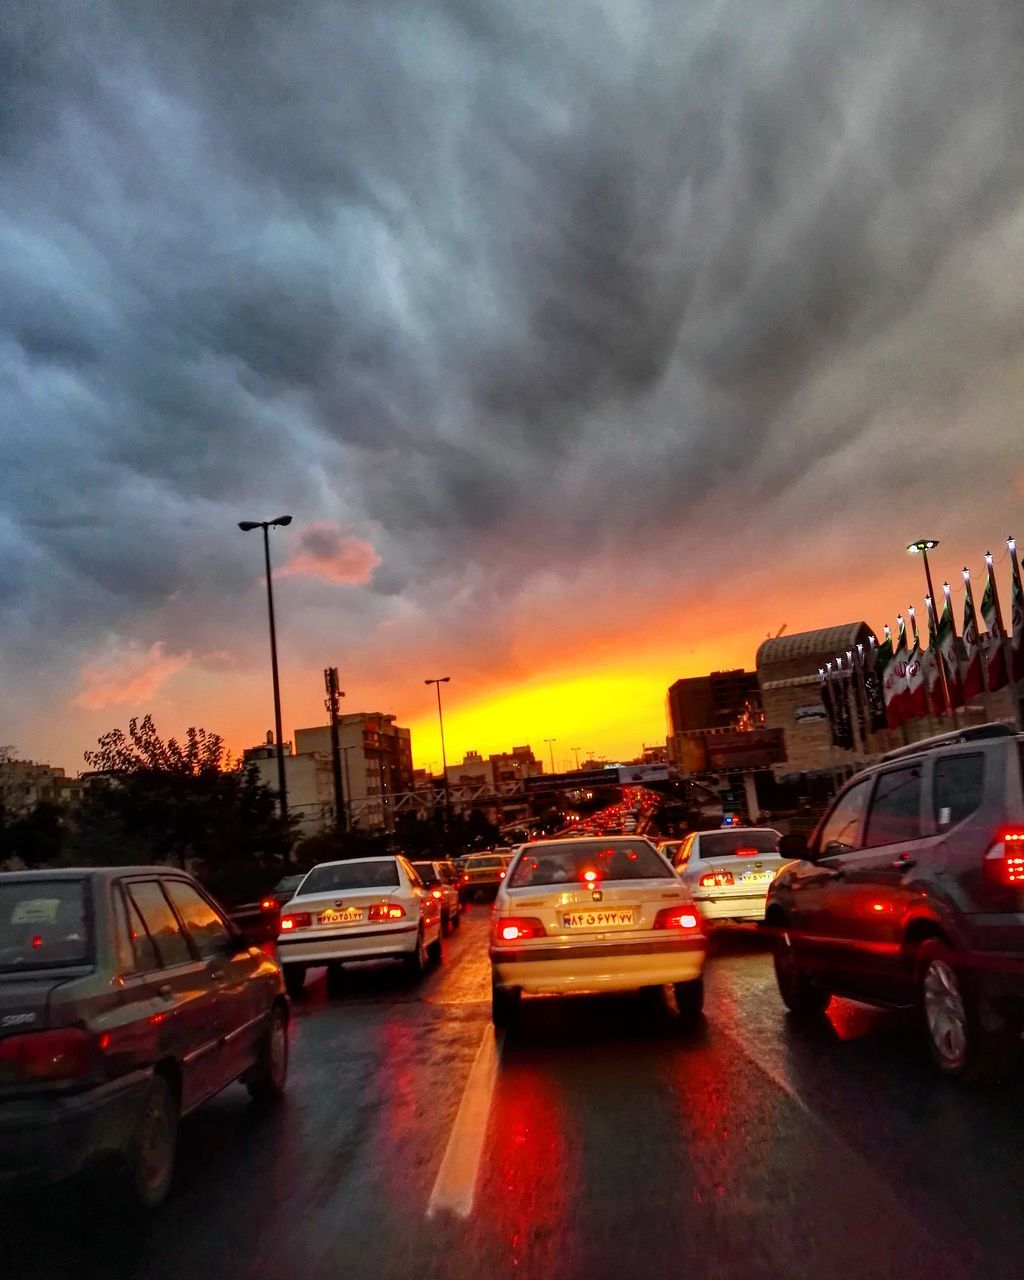 car, transportation, traffic, city, driving, cloud - sky, mode of transport, road, dramatic sky, sunset, no people, romantic sky, sky, yellow taxi, rush hour, outdoors, day